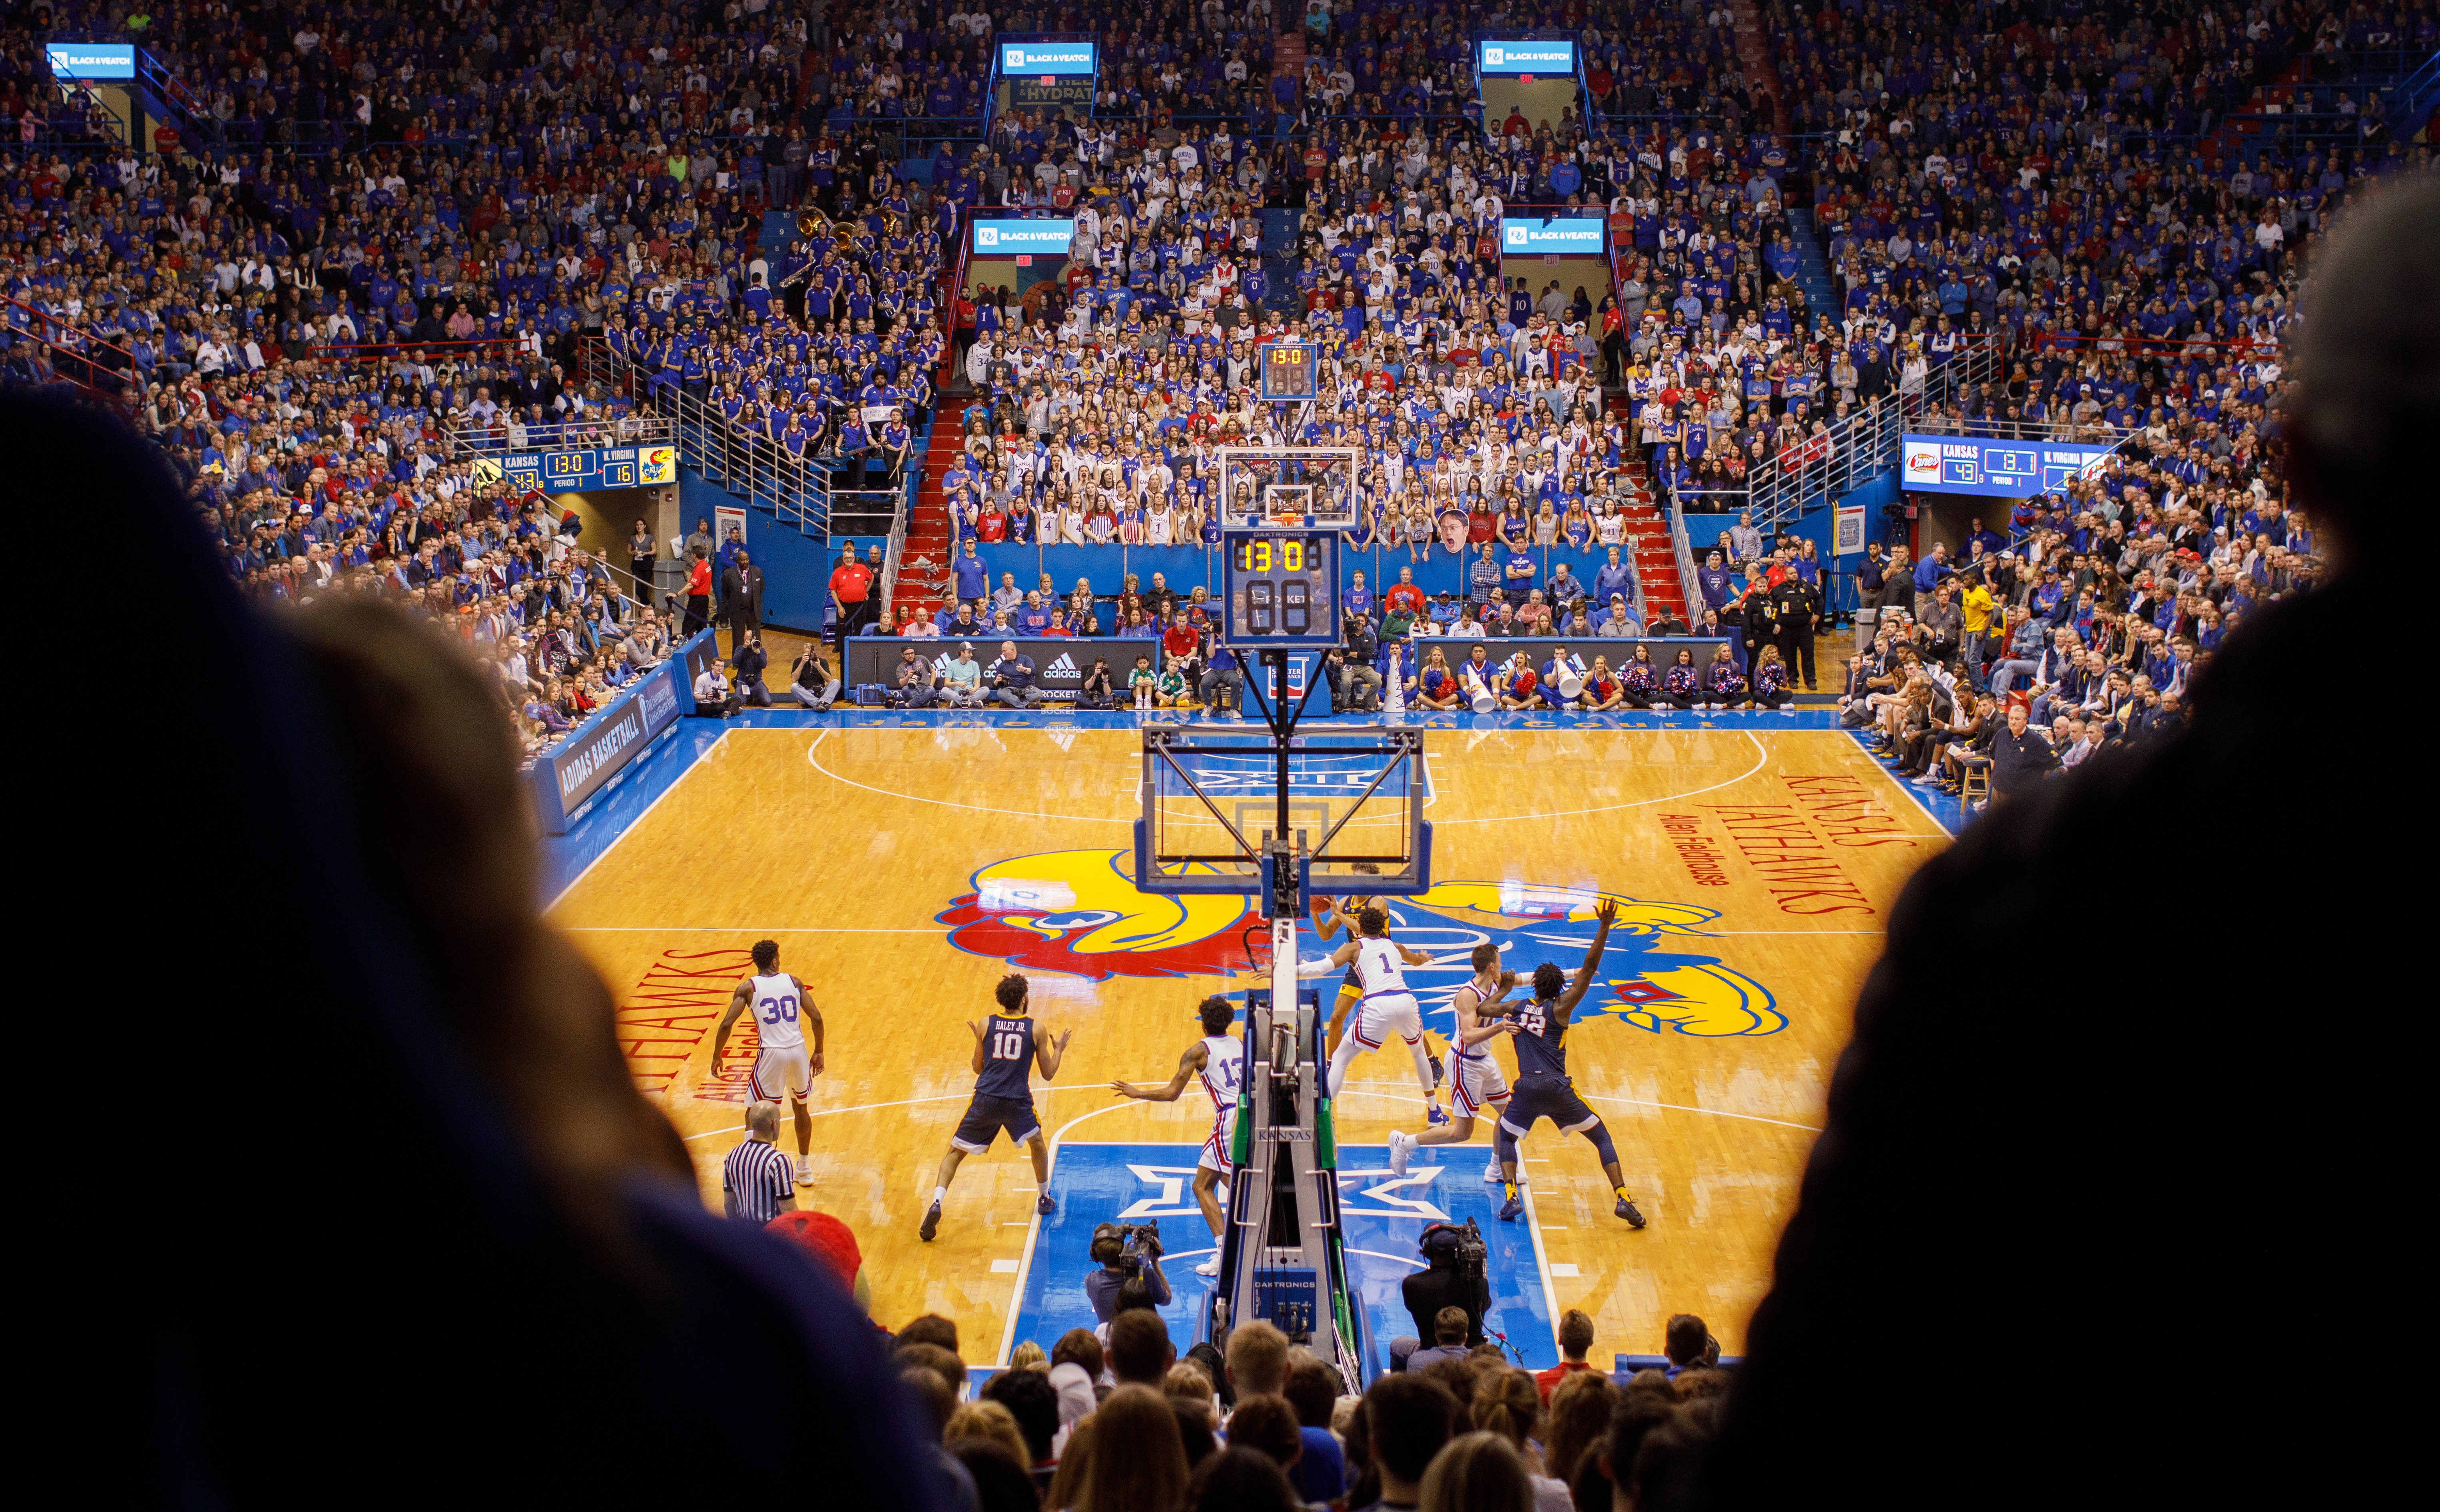 KU men’s basketball team playing on the court at Allen Fieldhouse